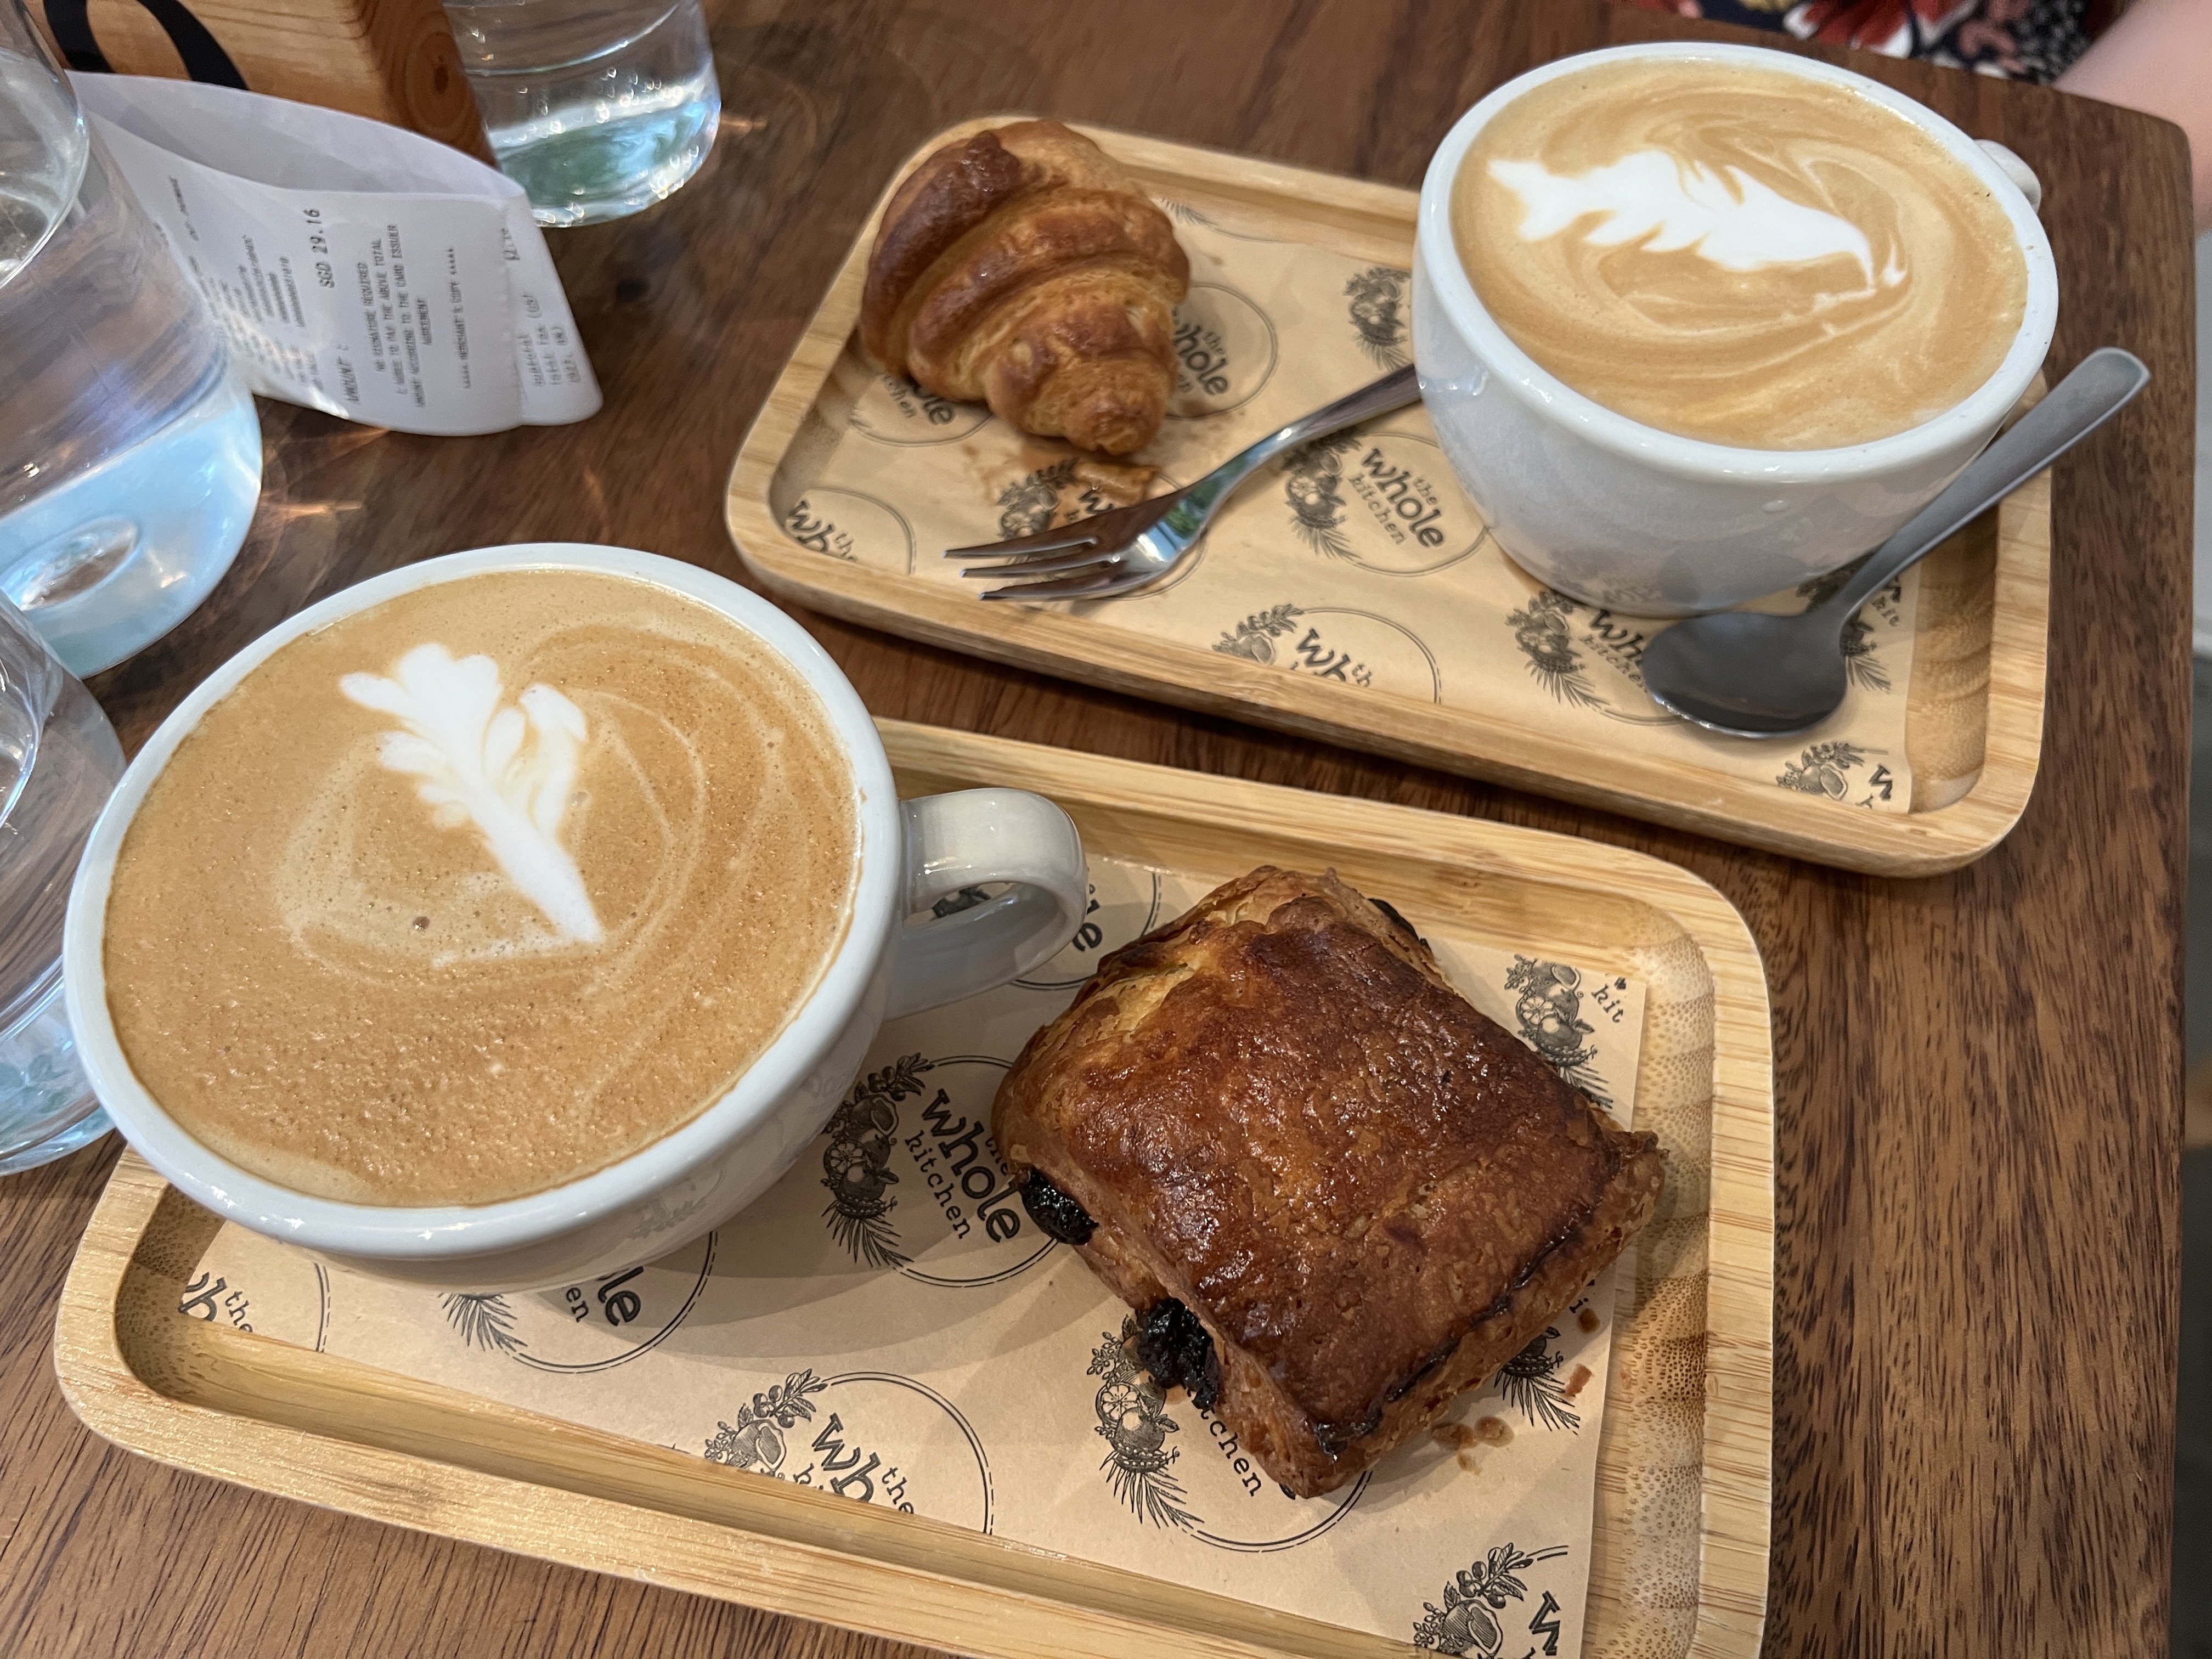 coffee and gluten-free croissants from The Whole Kitchen